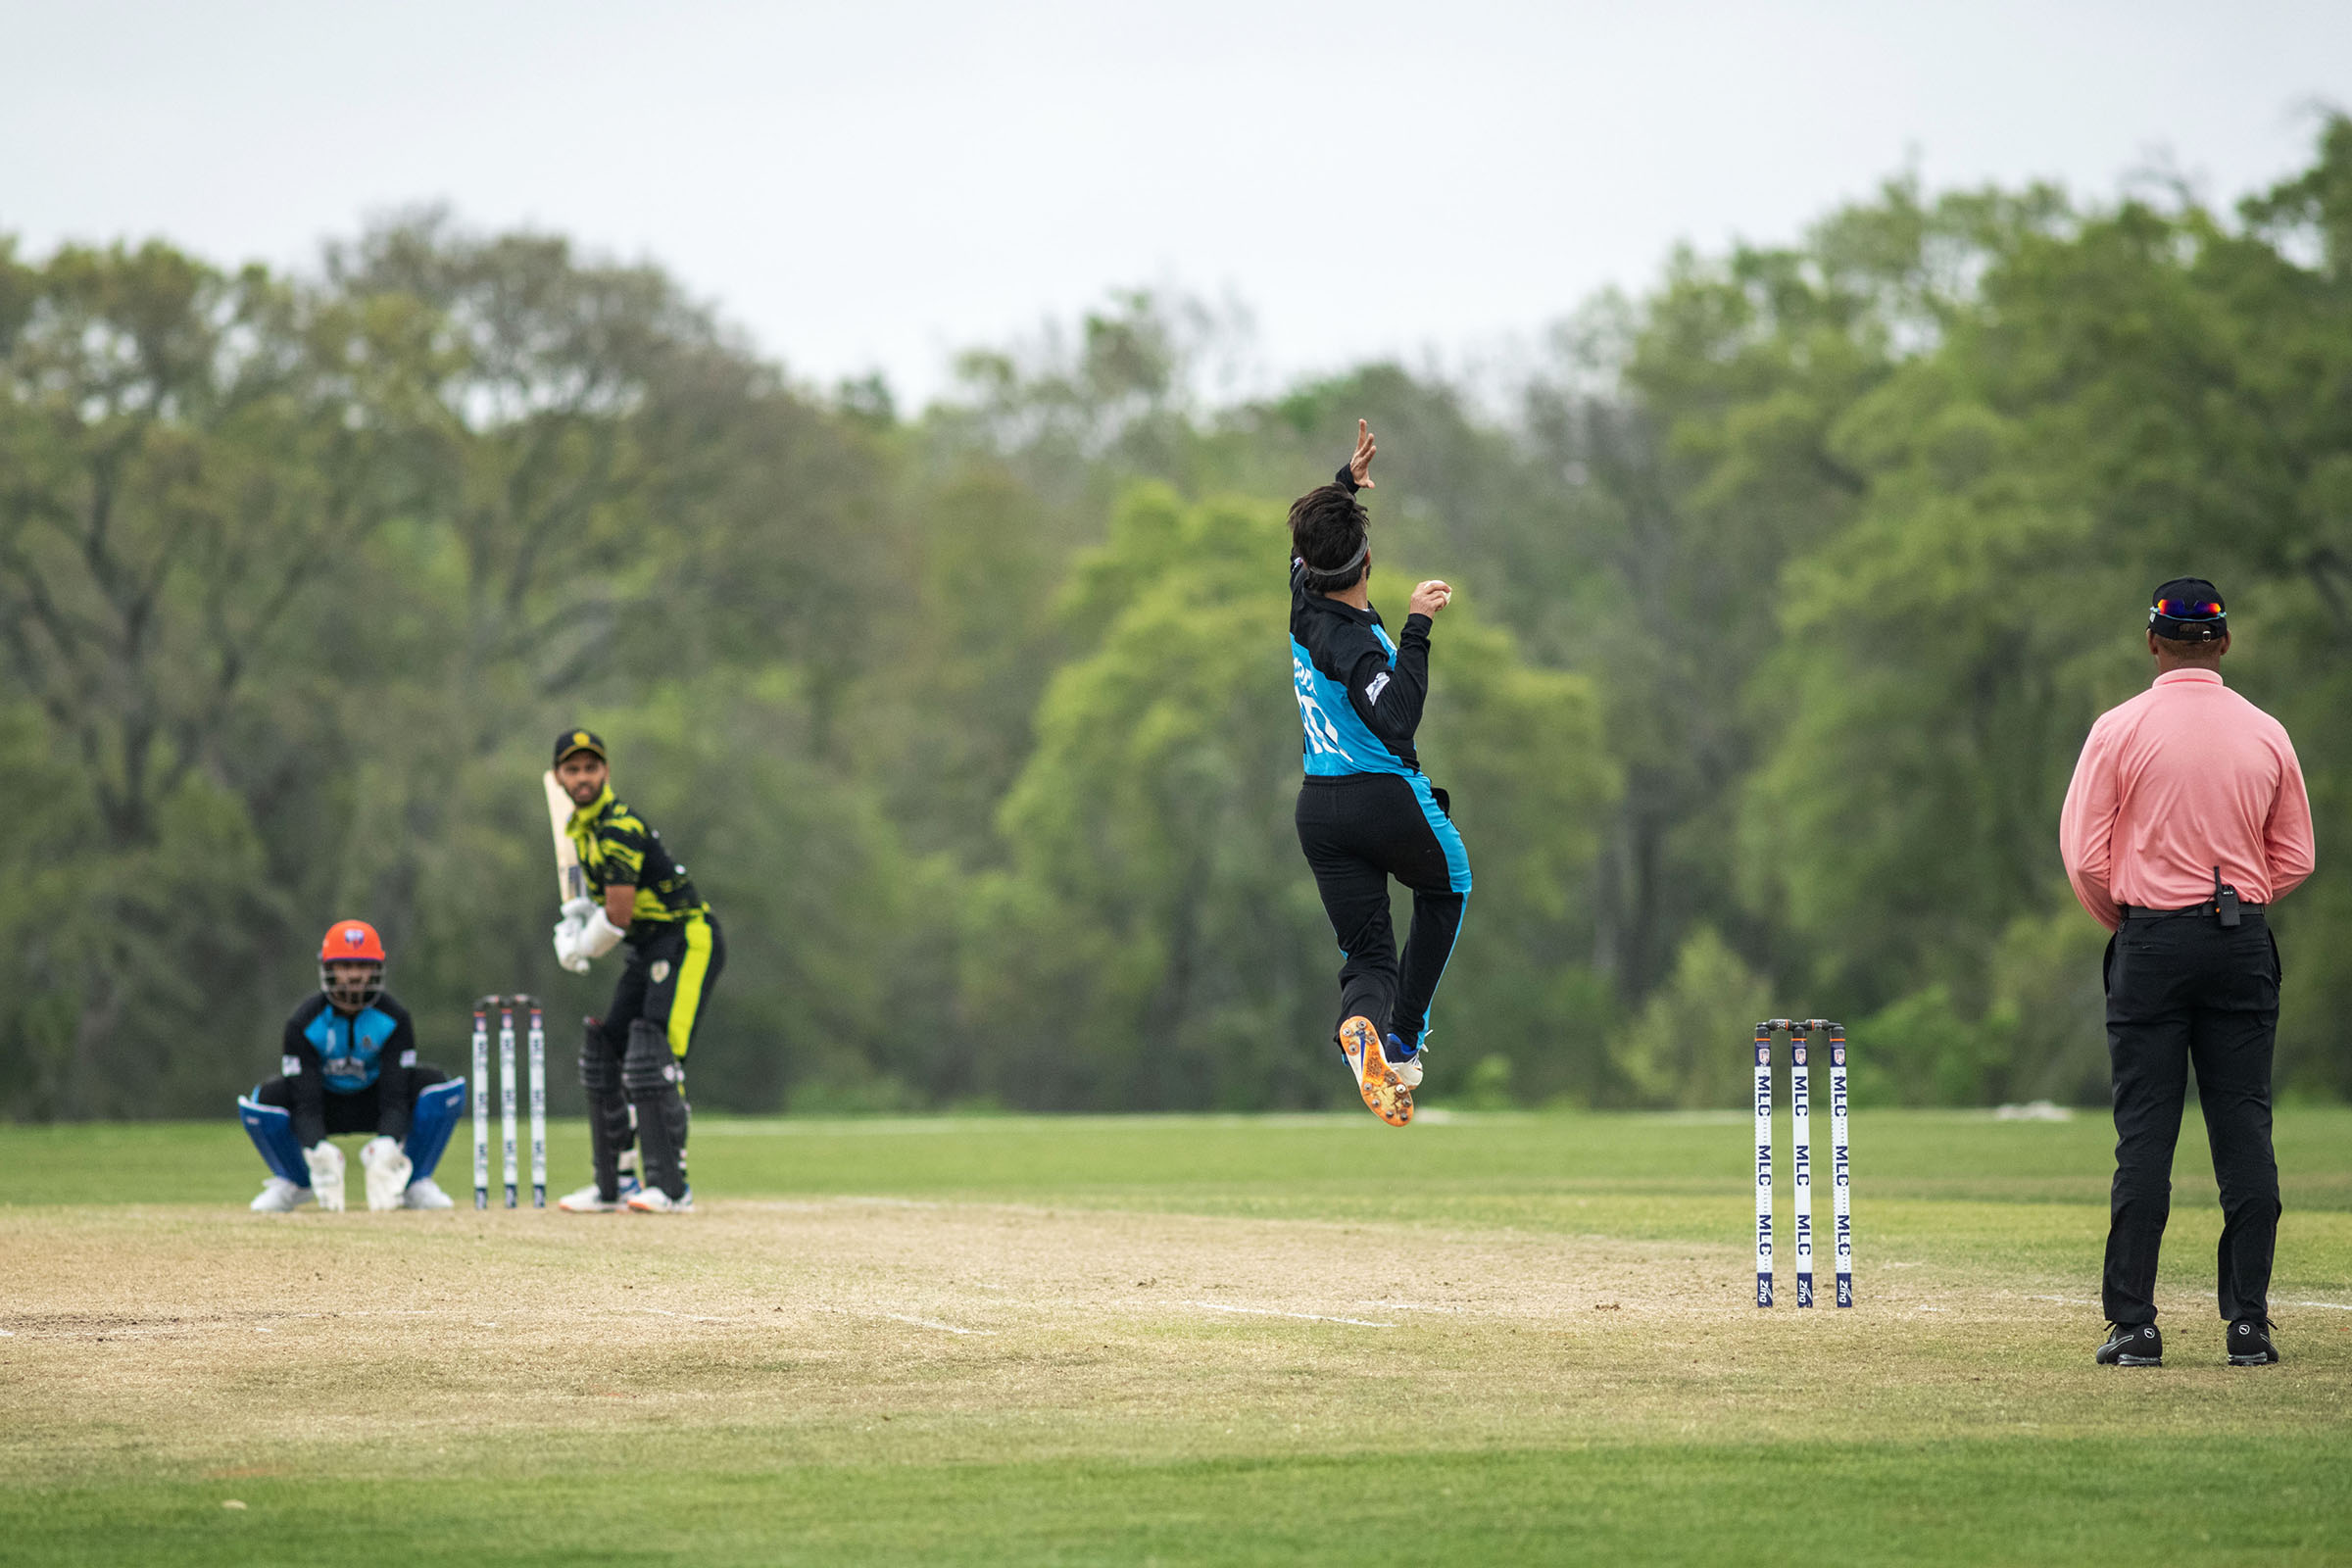 A cricket player jumps and throws a ball from one set of wickets down the field